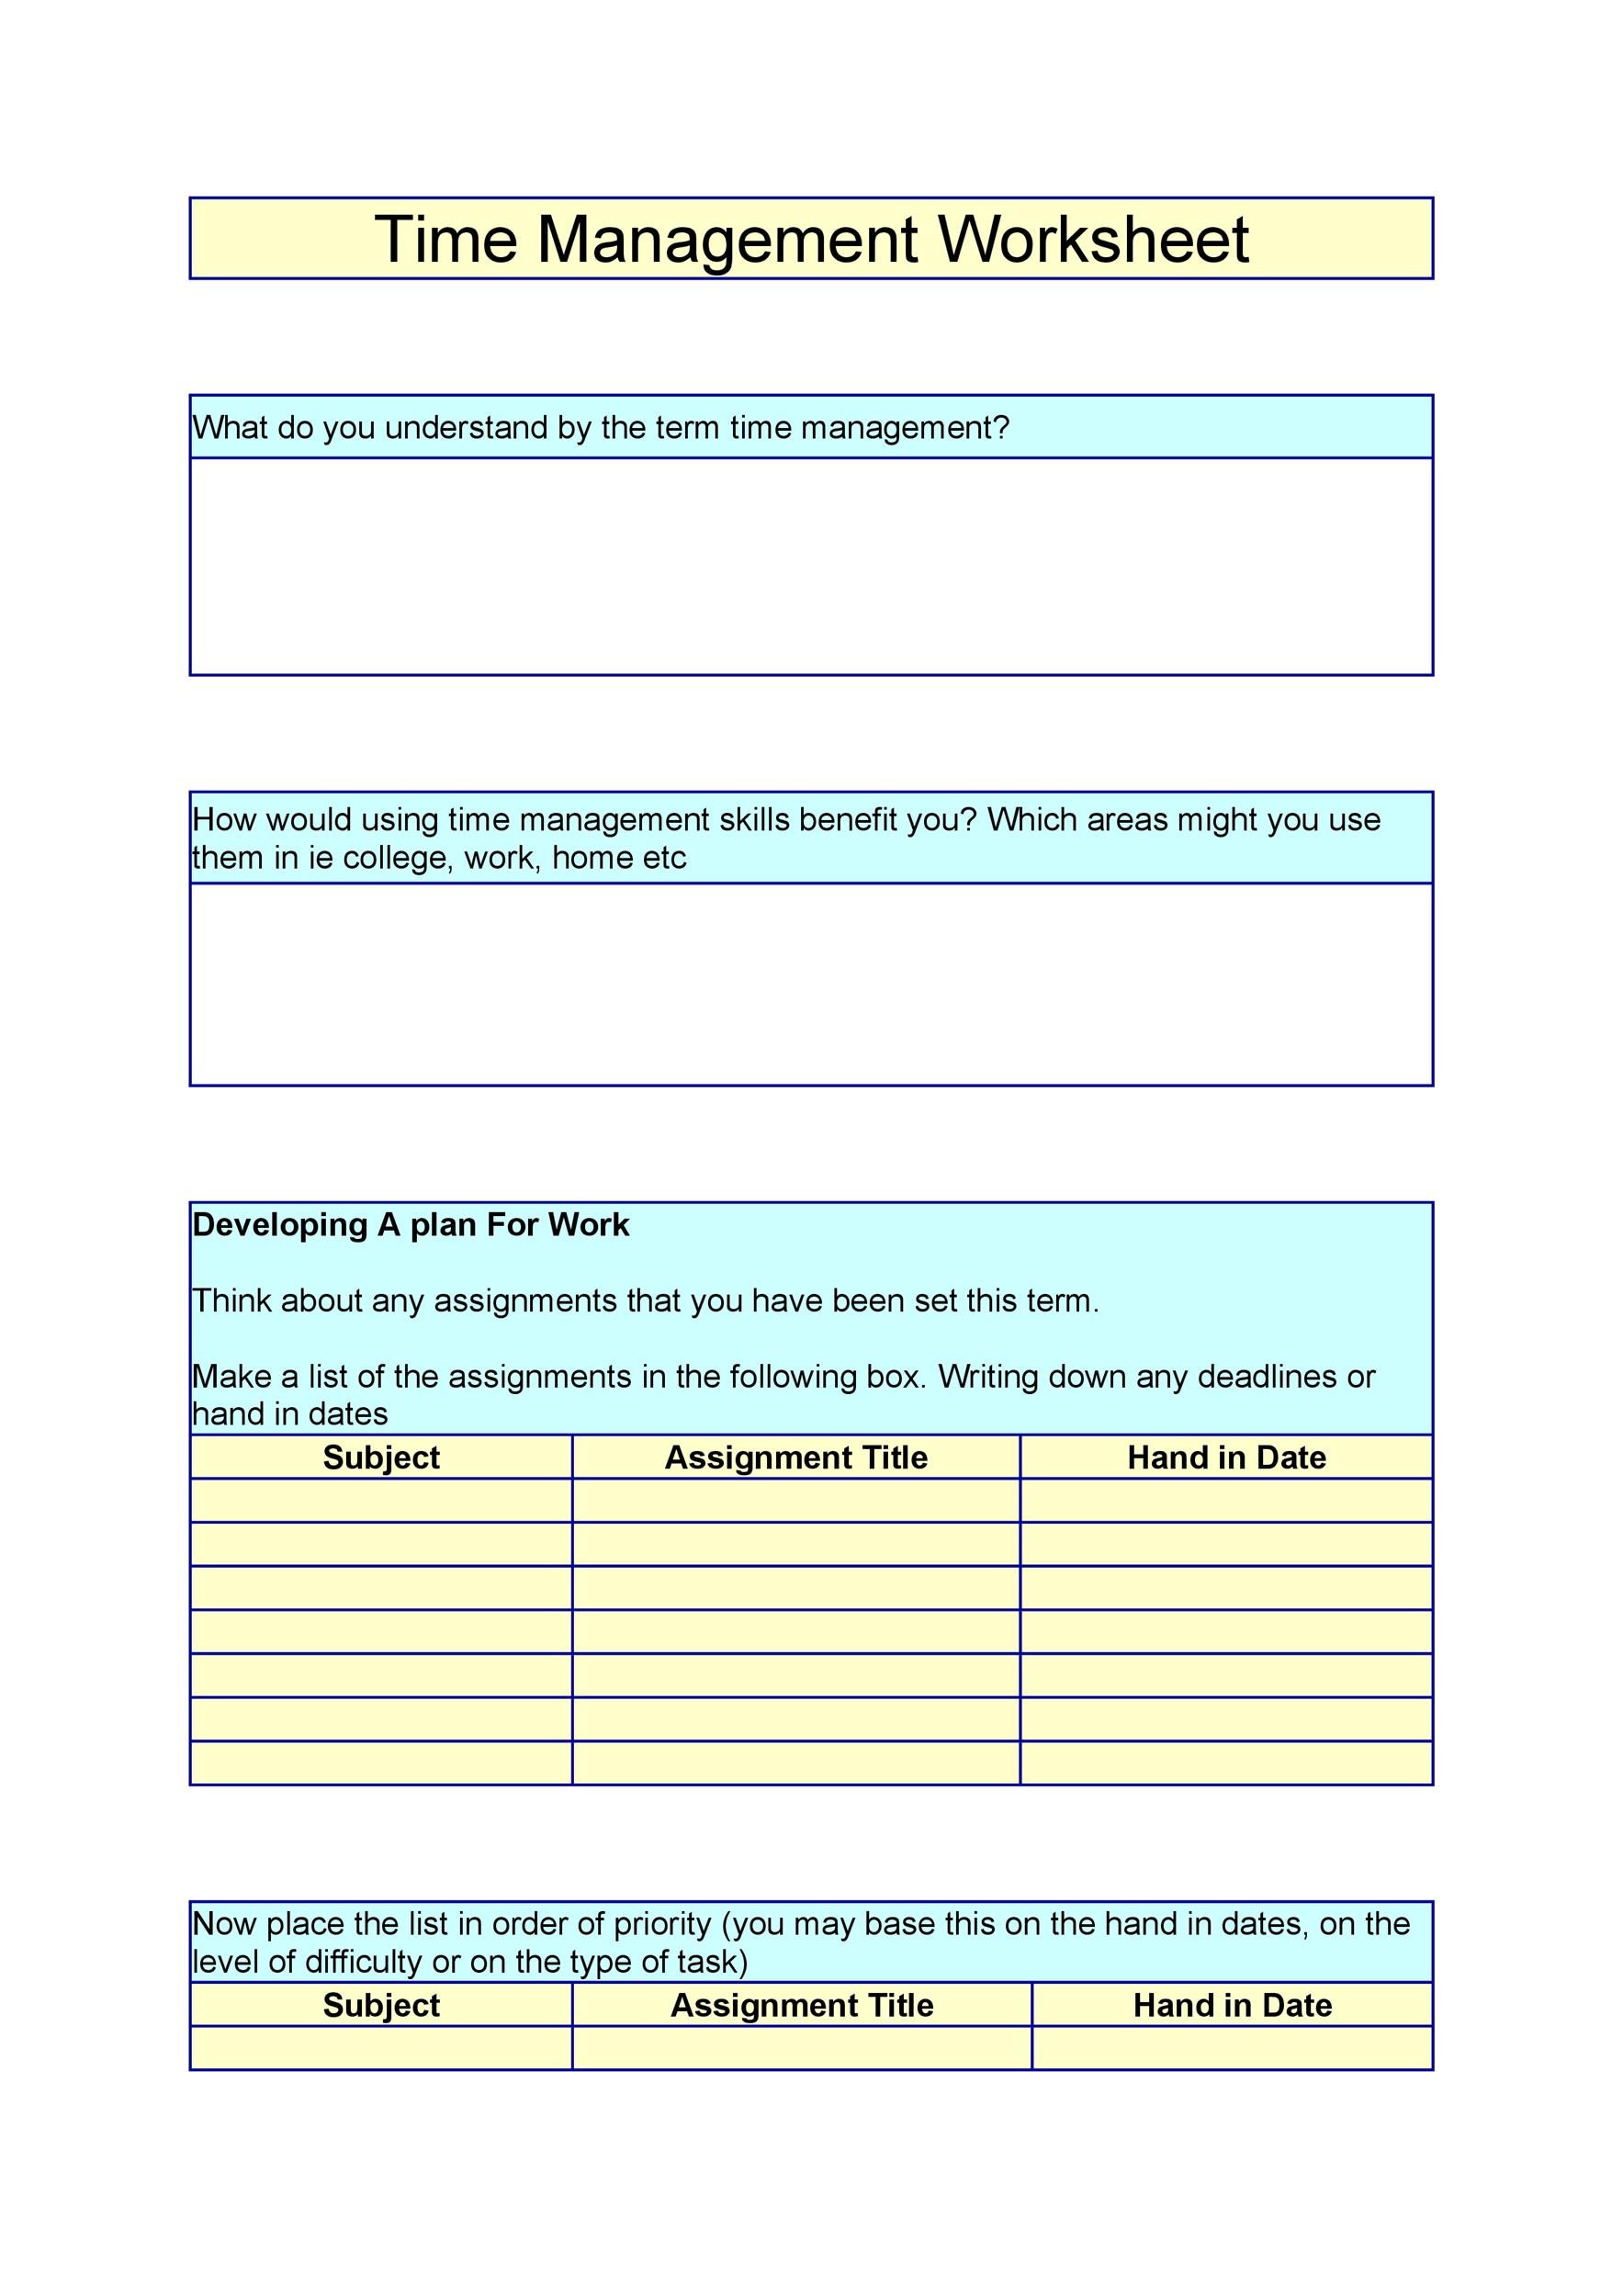 41 S M A R T Goal Setting Templates Worksheets TemplateLab